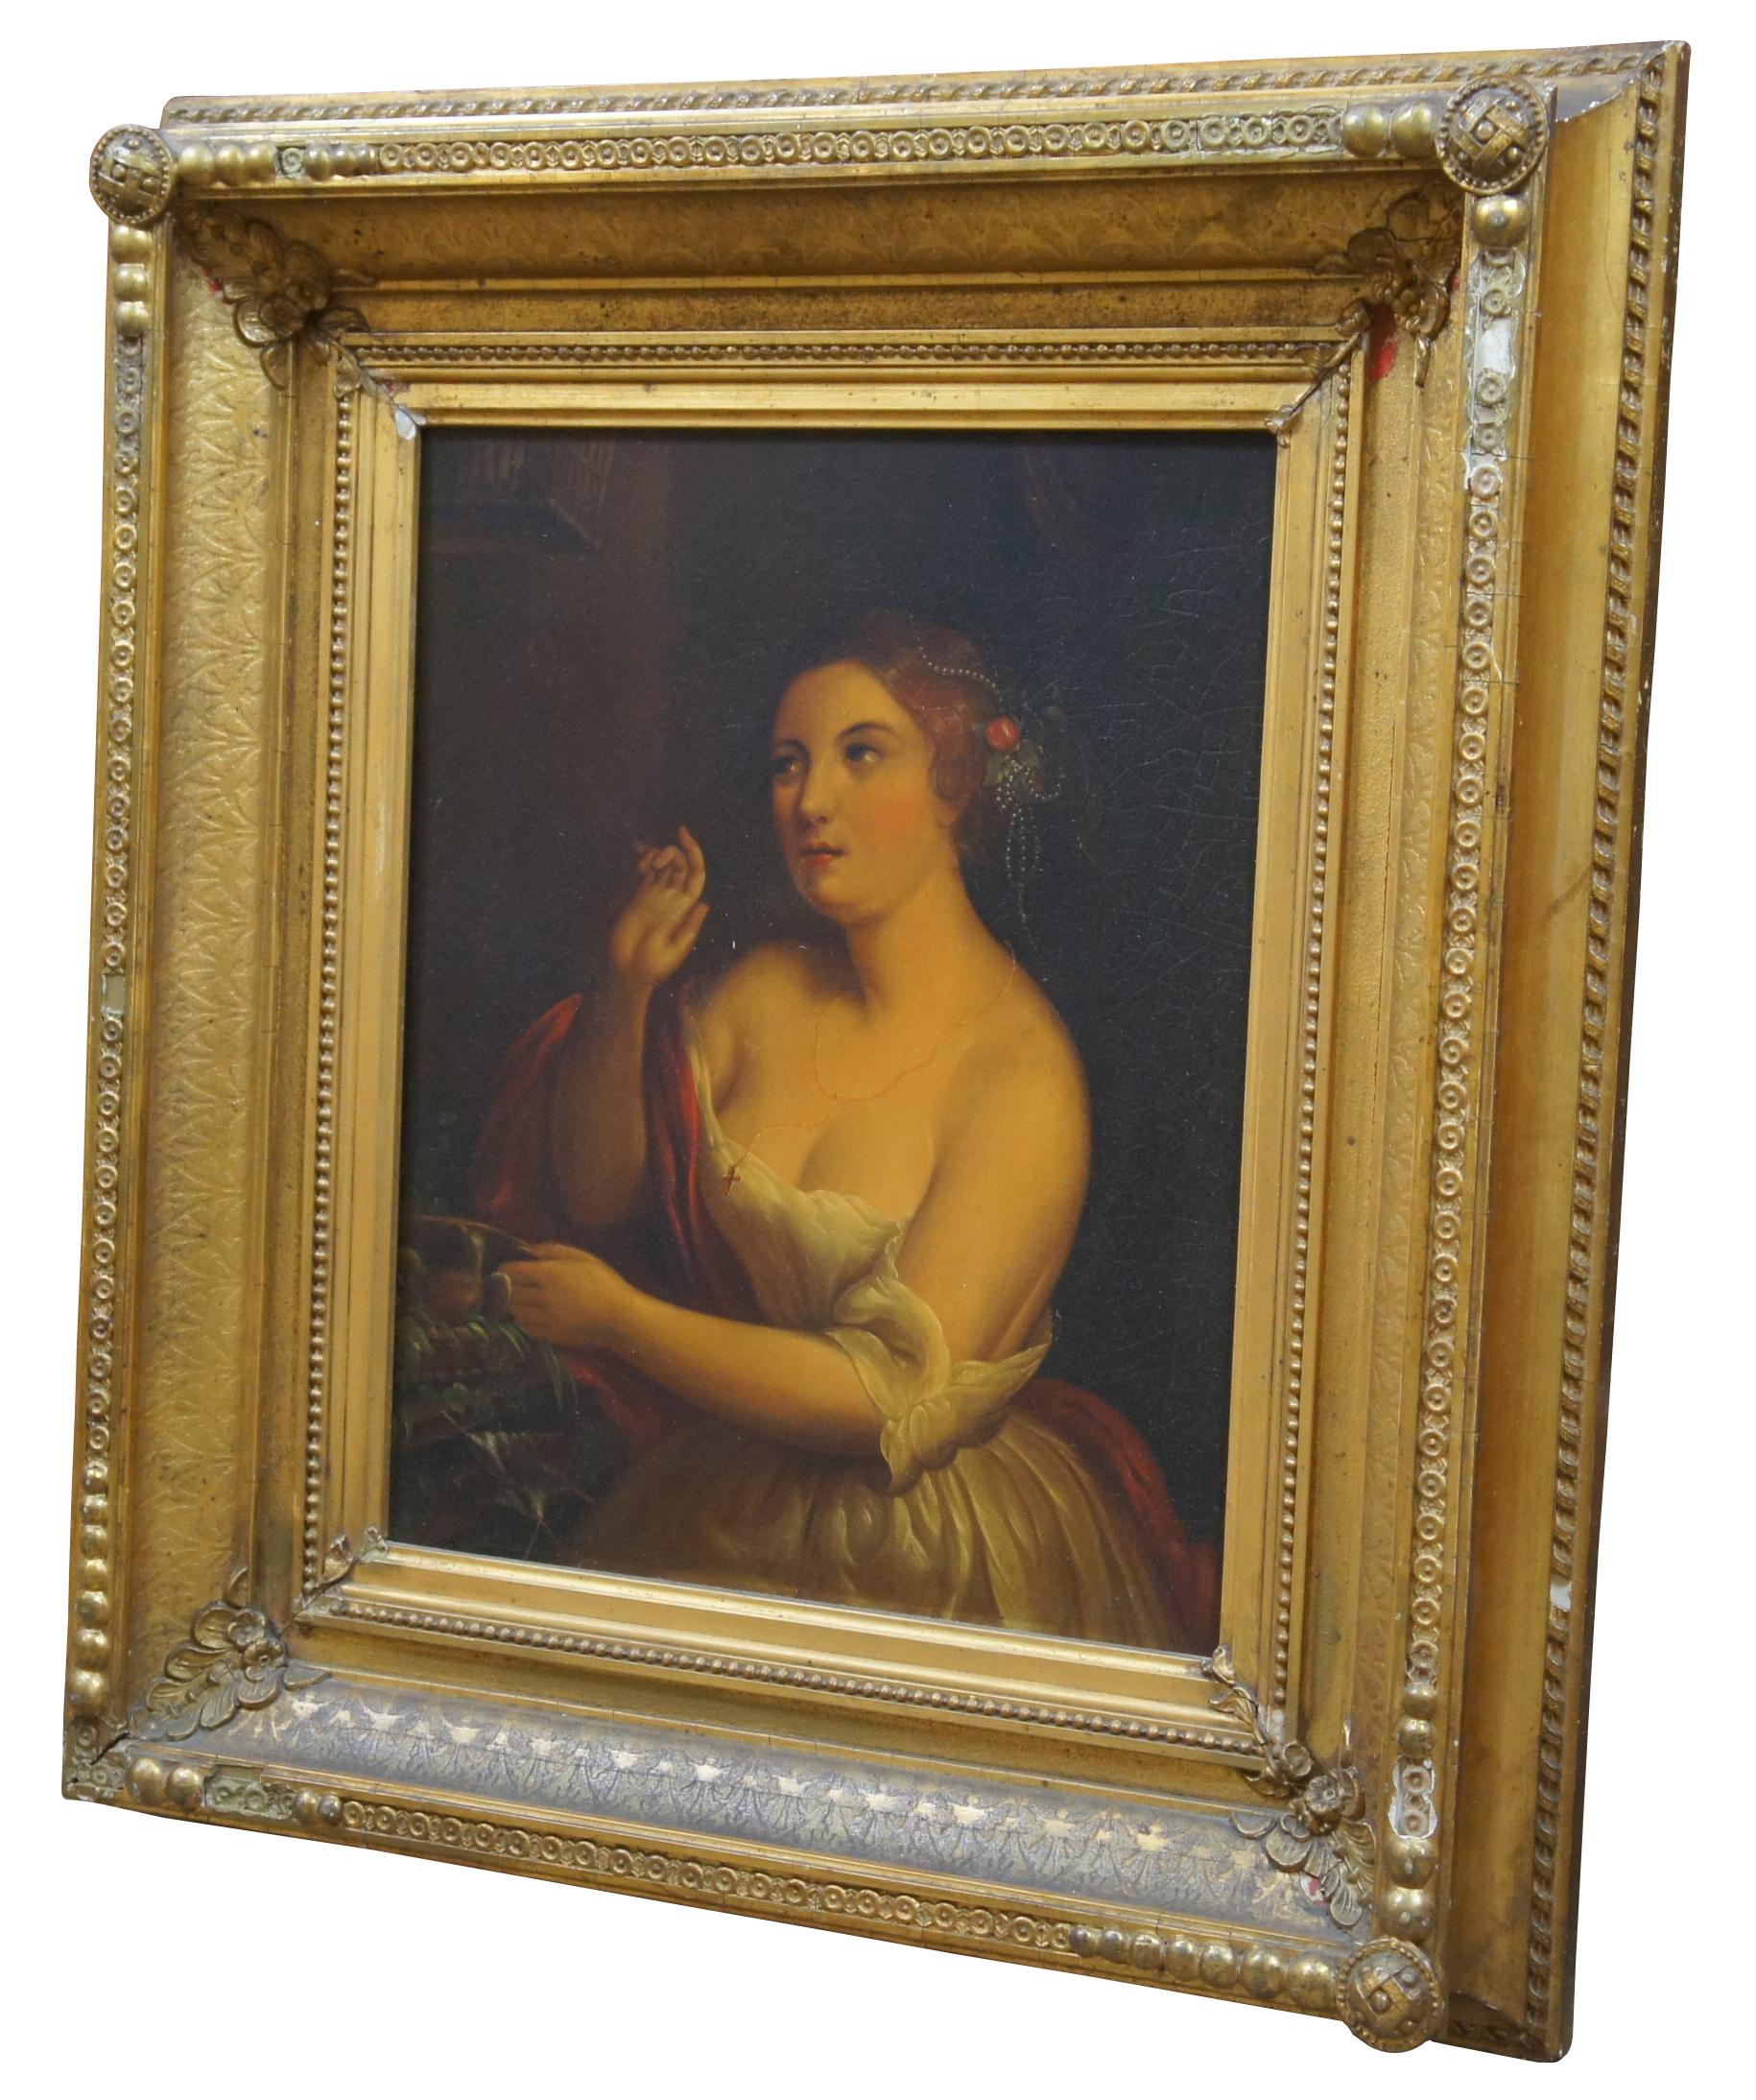 Antique 1800s German oil painting on tin. The portrait features a young woman suggestively posing with gaze off to the side while holding onto a bird in a basket. Features a period frame with medallions and ornate beaded design. Has royal crown mark